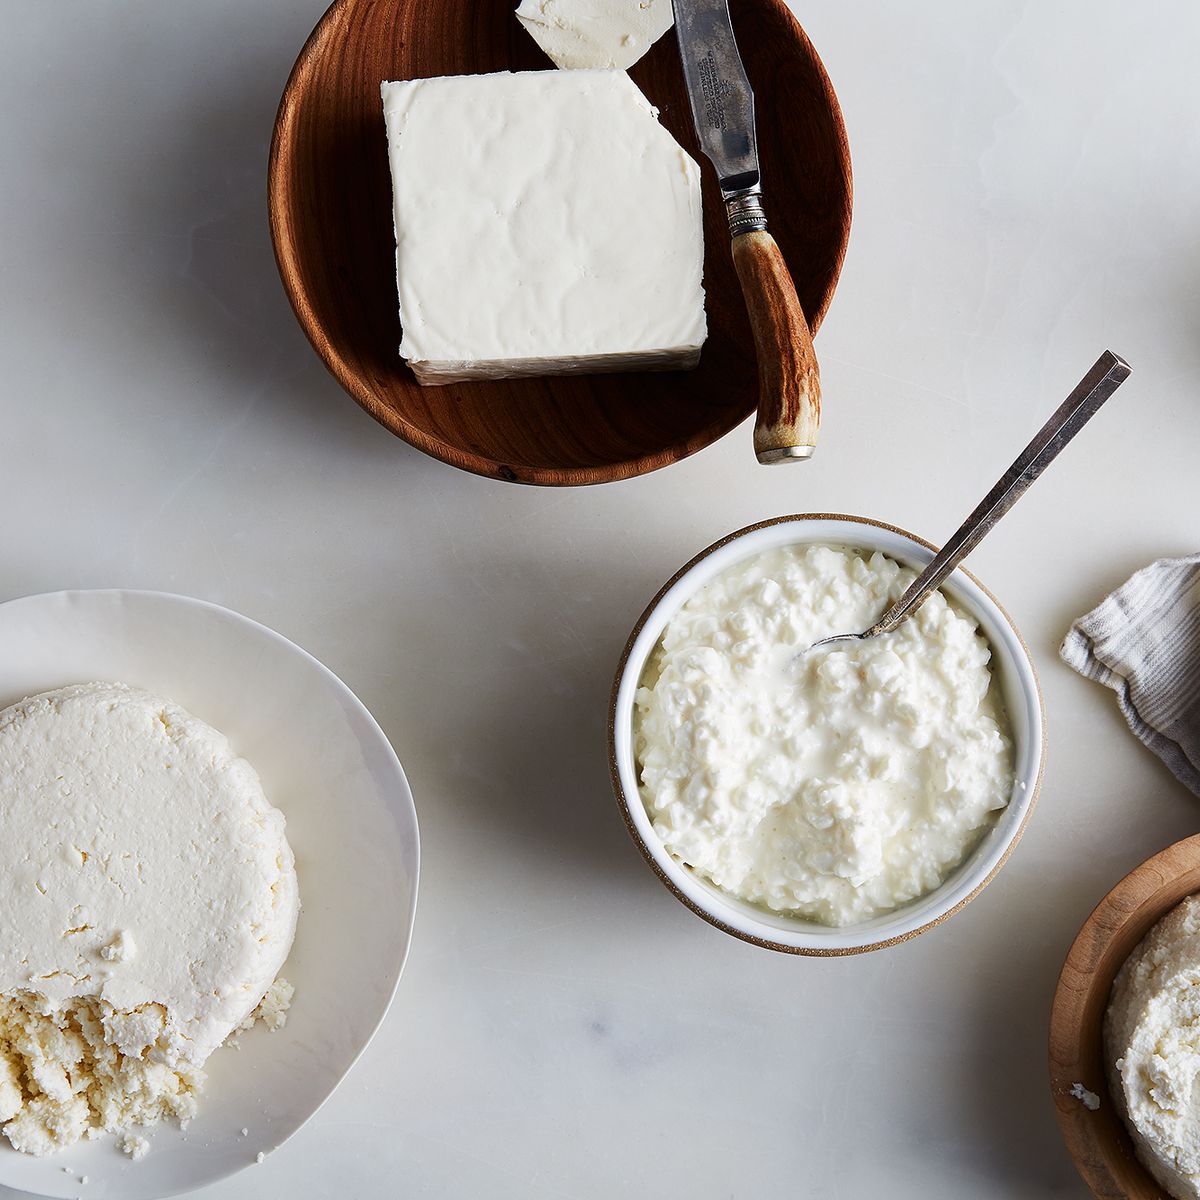 How to Make Cheese From Sour Milk